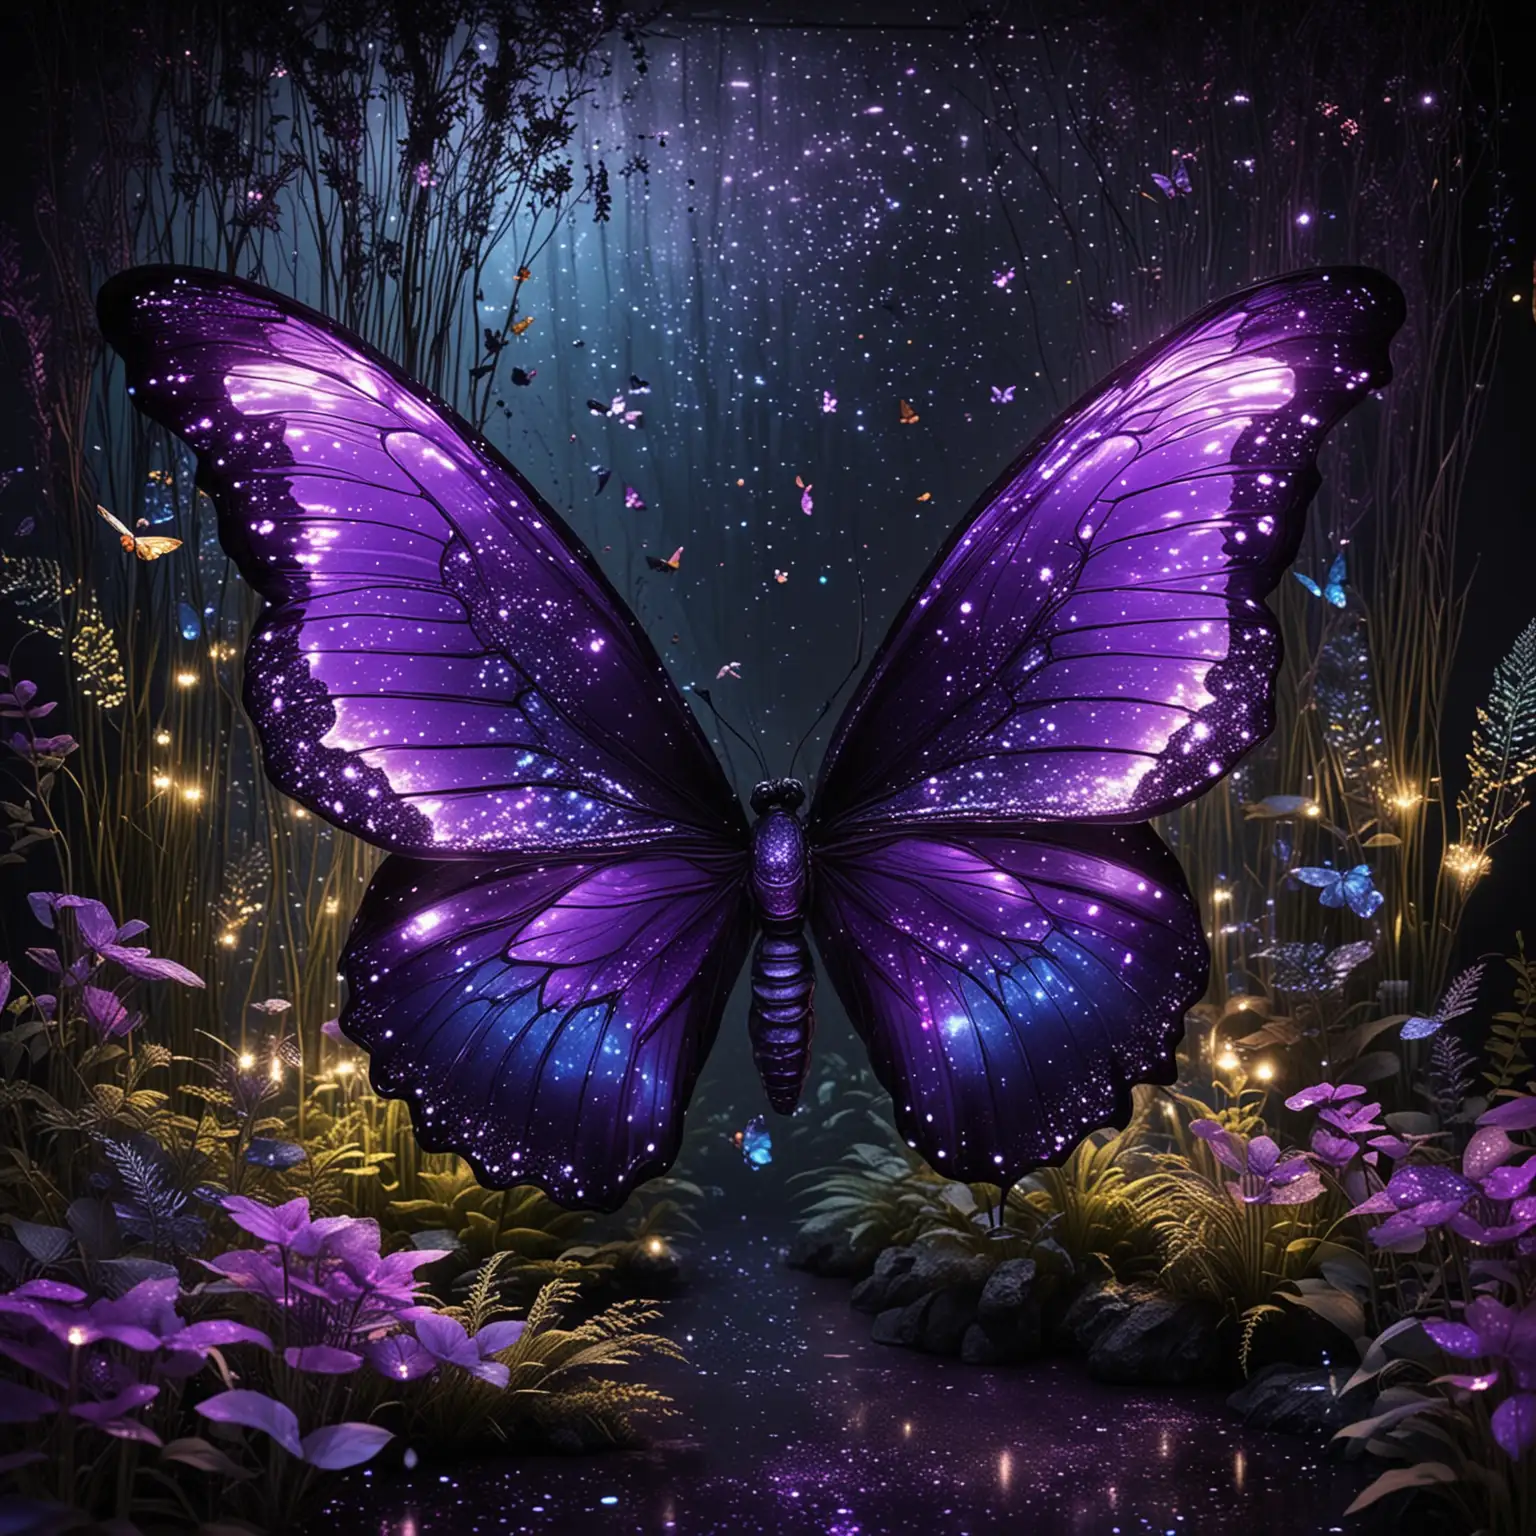 Futuristic Wildlife Oasis. style of a fluttering butterfly garden, blending wildlife sanctuaries with futuristic glowing enhancements, in butterfly wing iridescent and cyber mesh purple and black glowdust